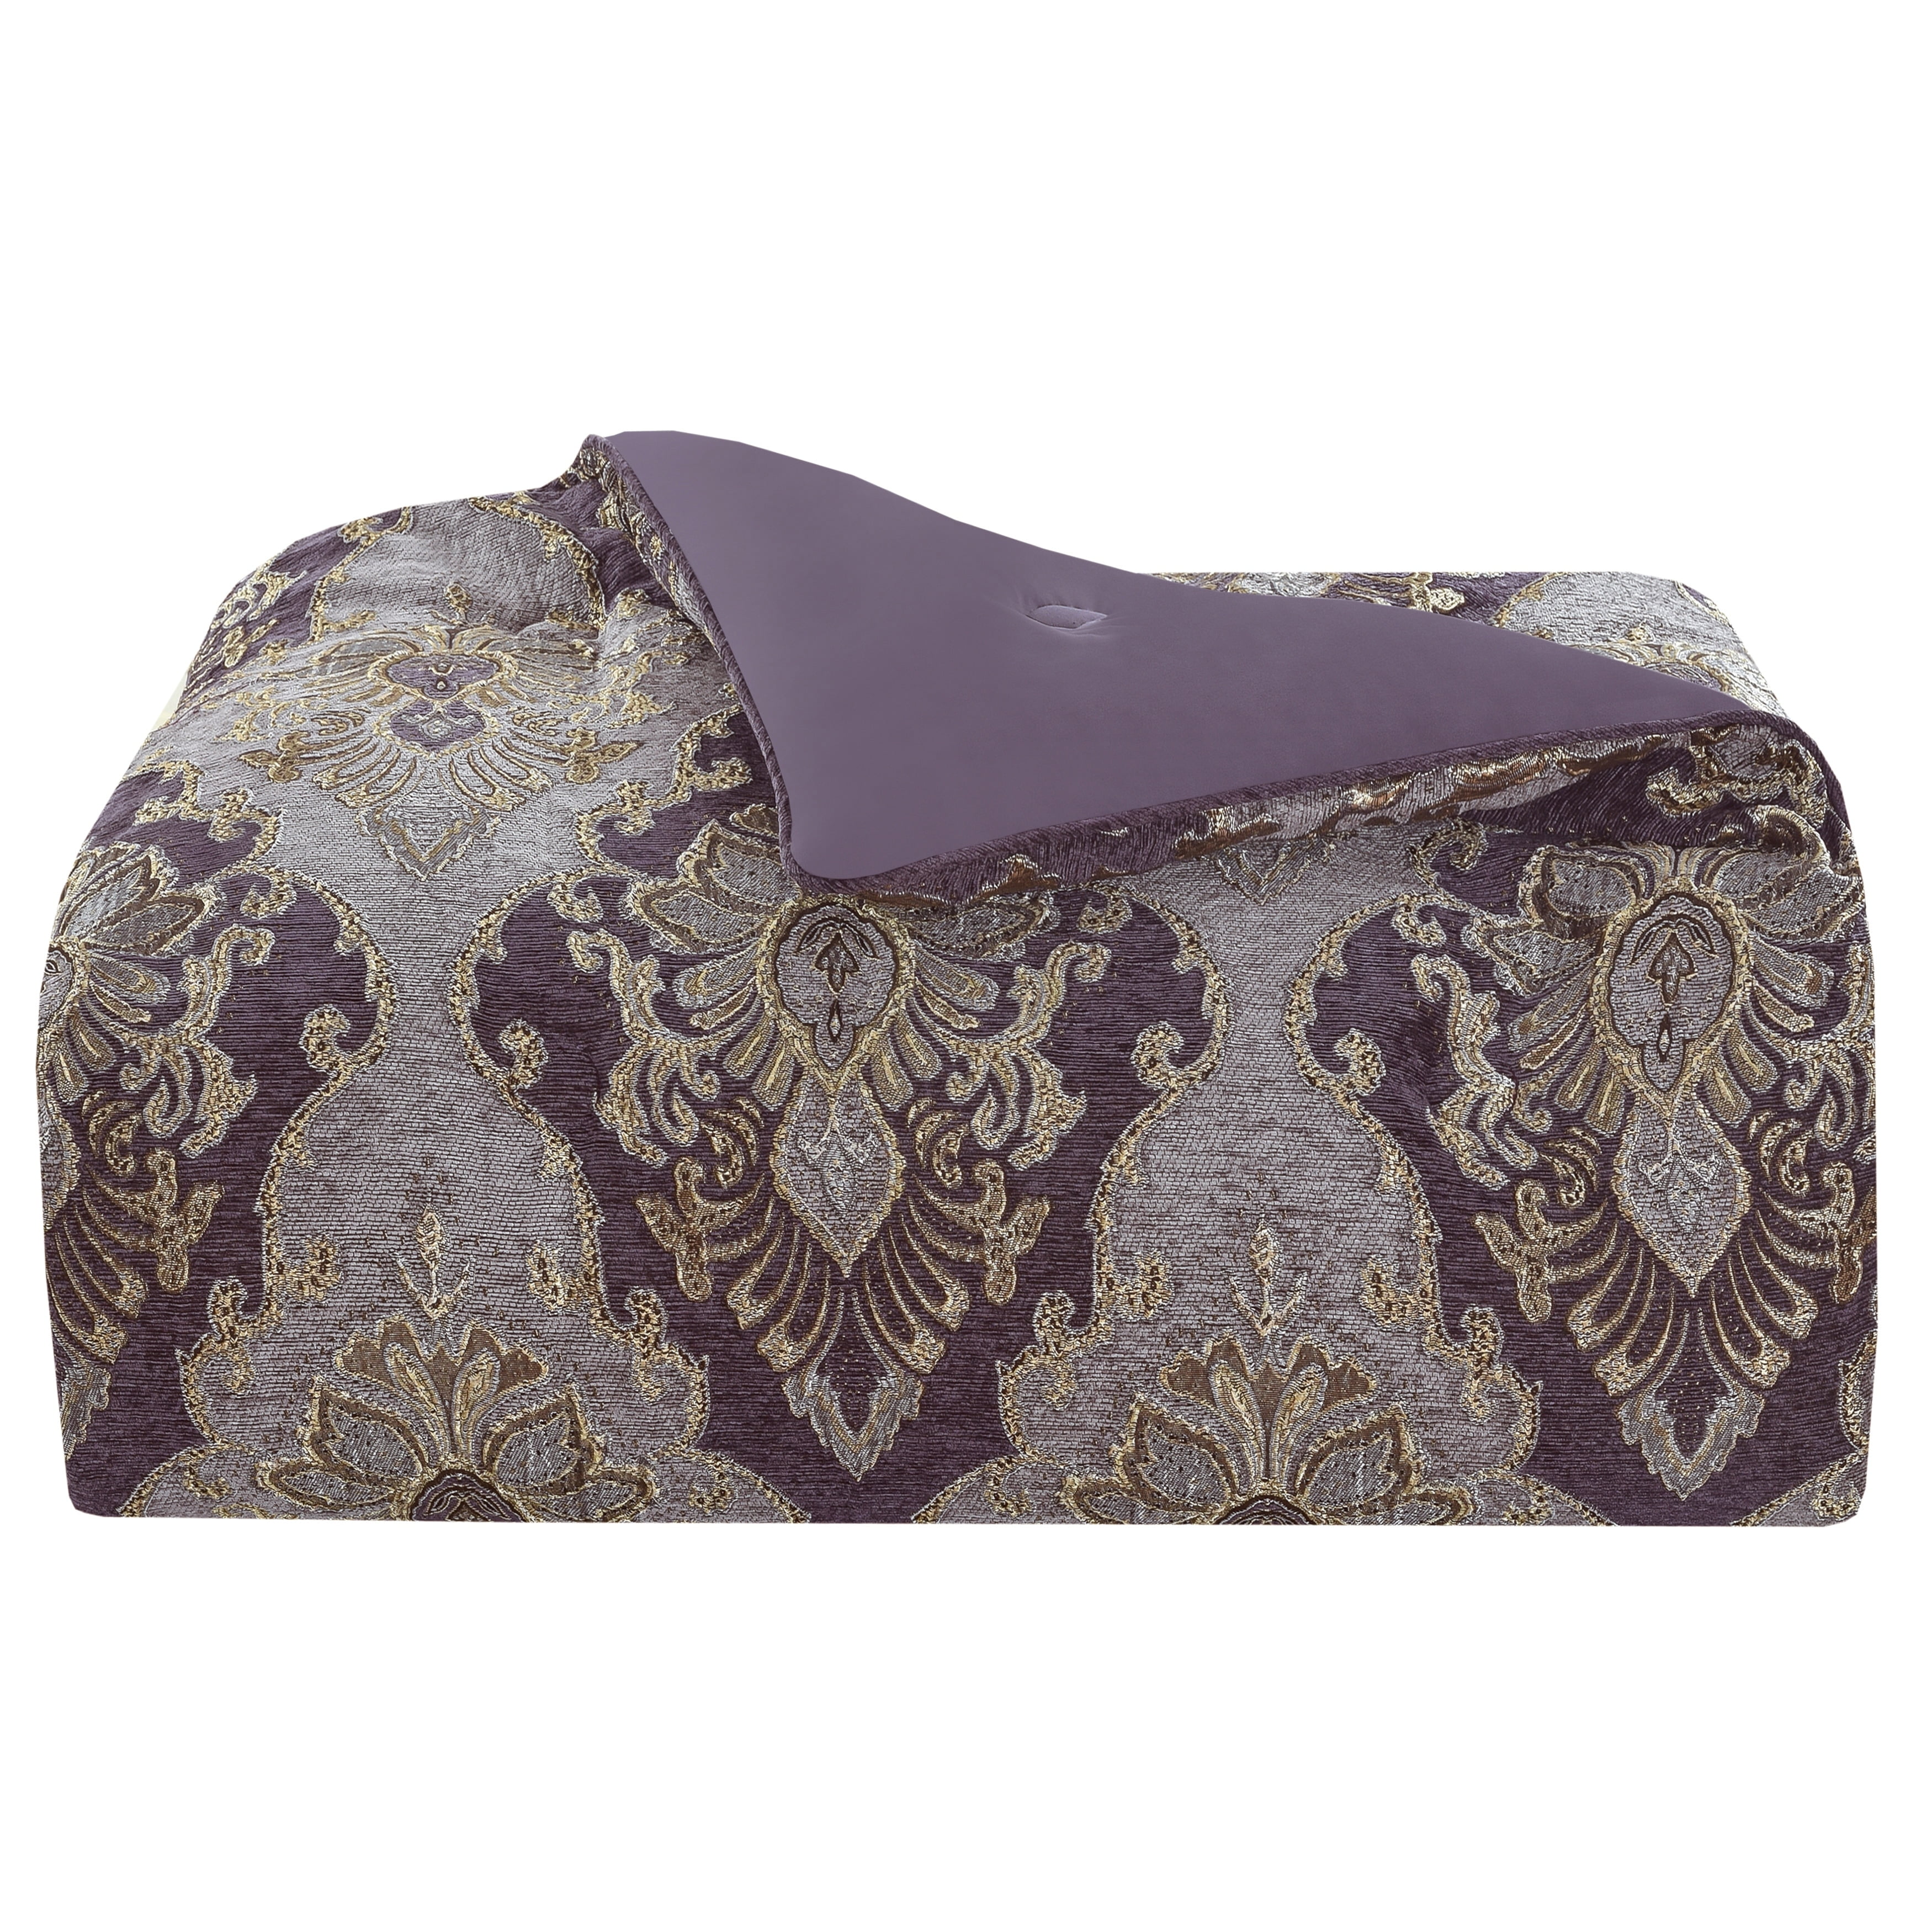 Dominique Lavender and Grape Damask Comforter Bedding by Five Queens Court